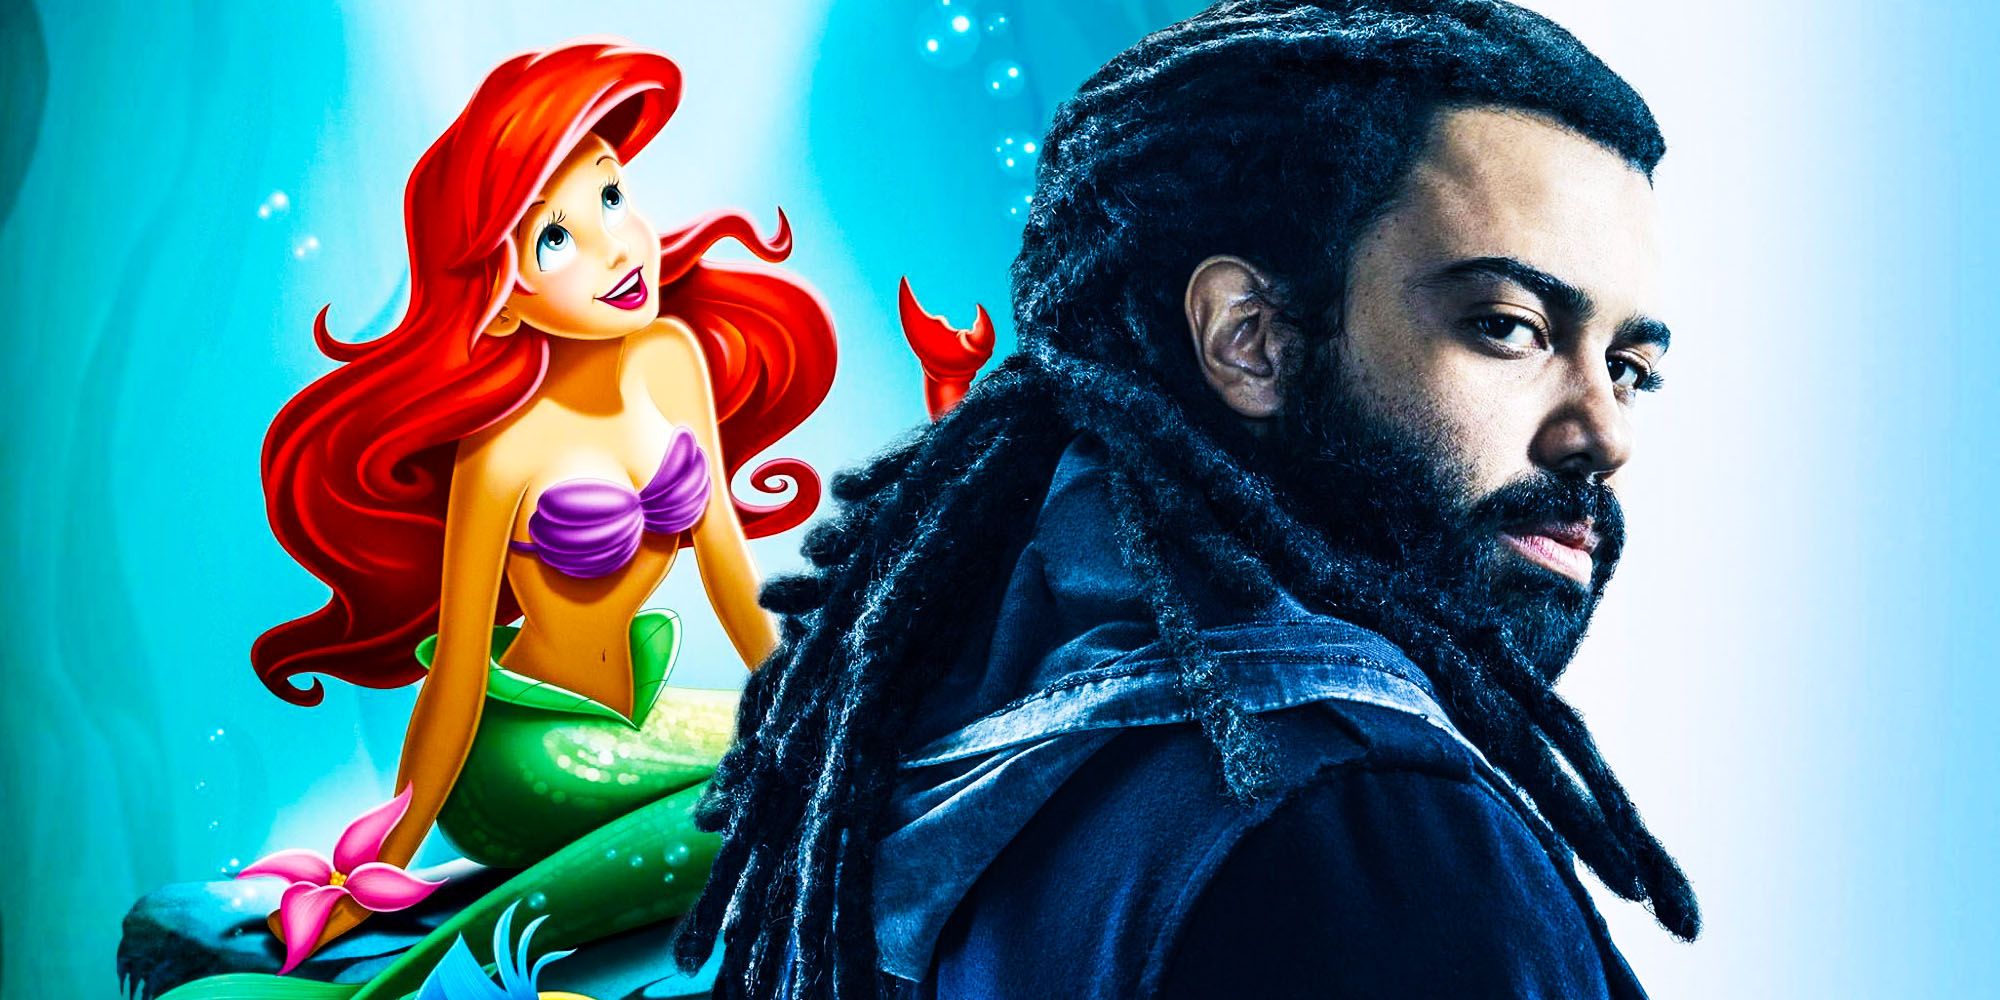 Daveed Diggs' Little Mermaid Tease Makes Disney's Remake Even More Exciting